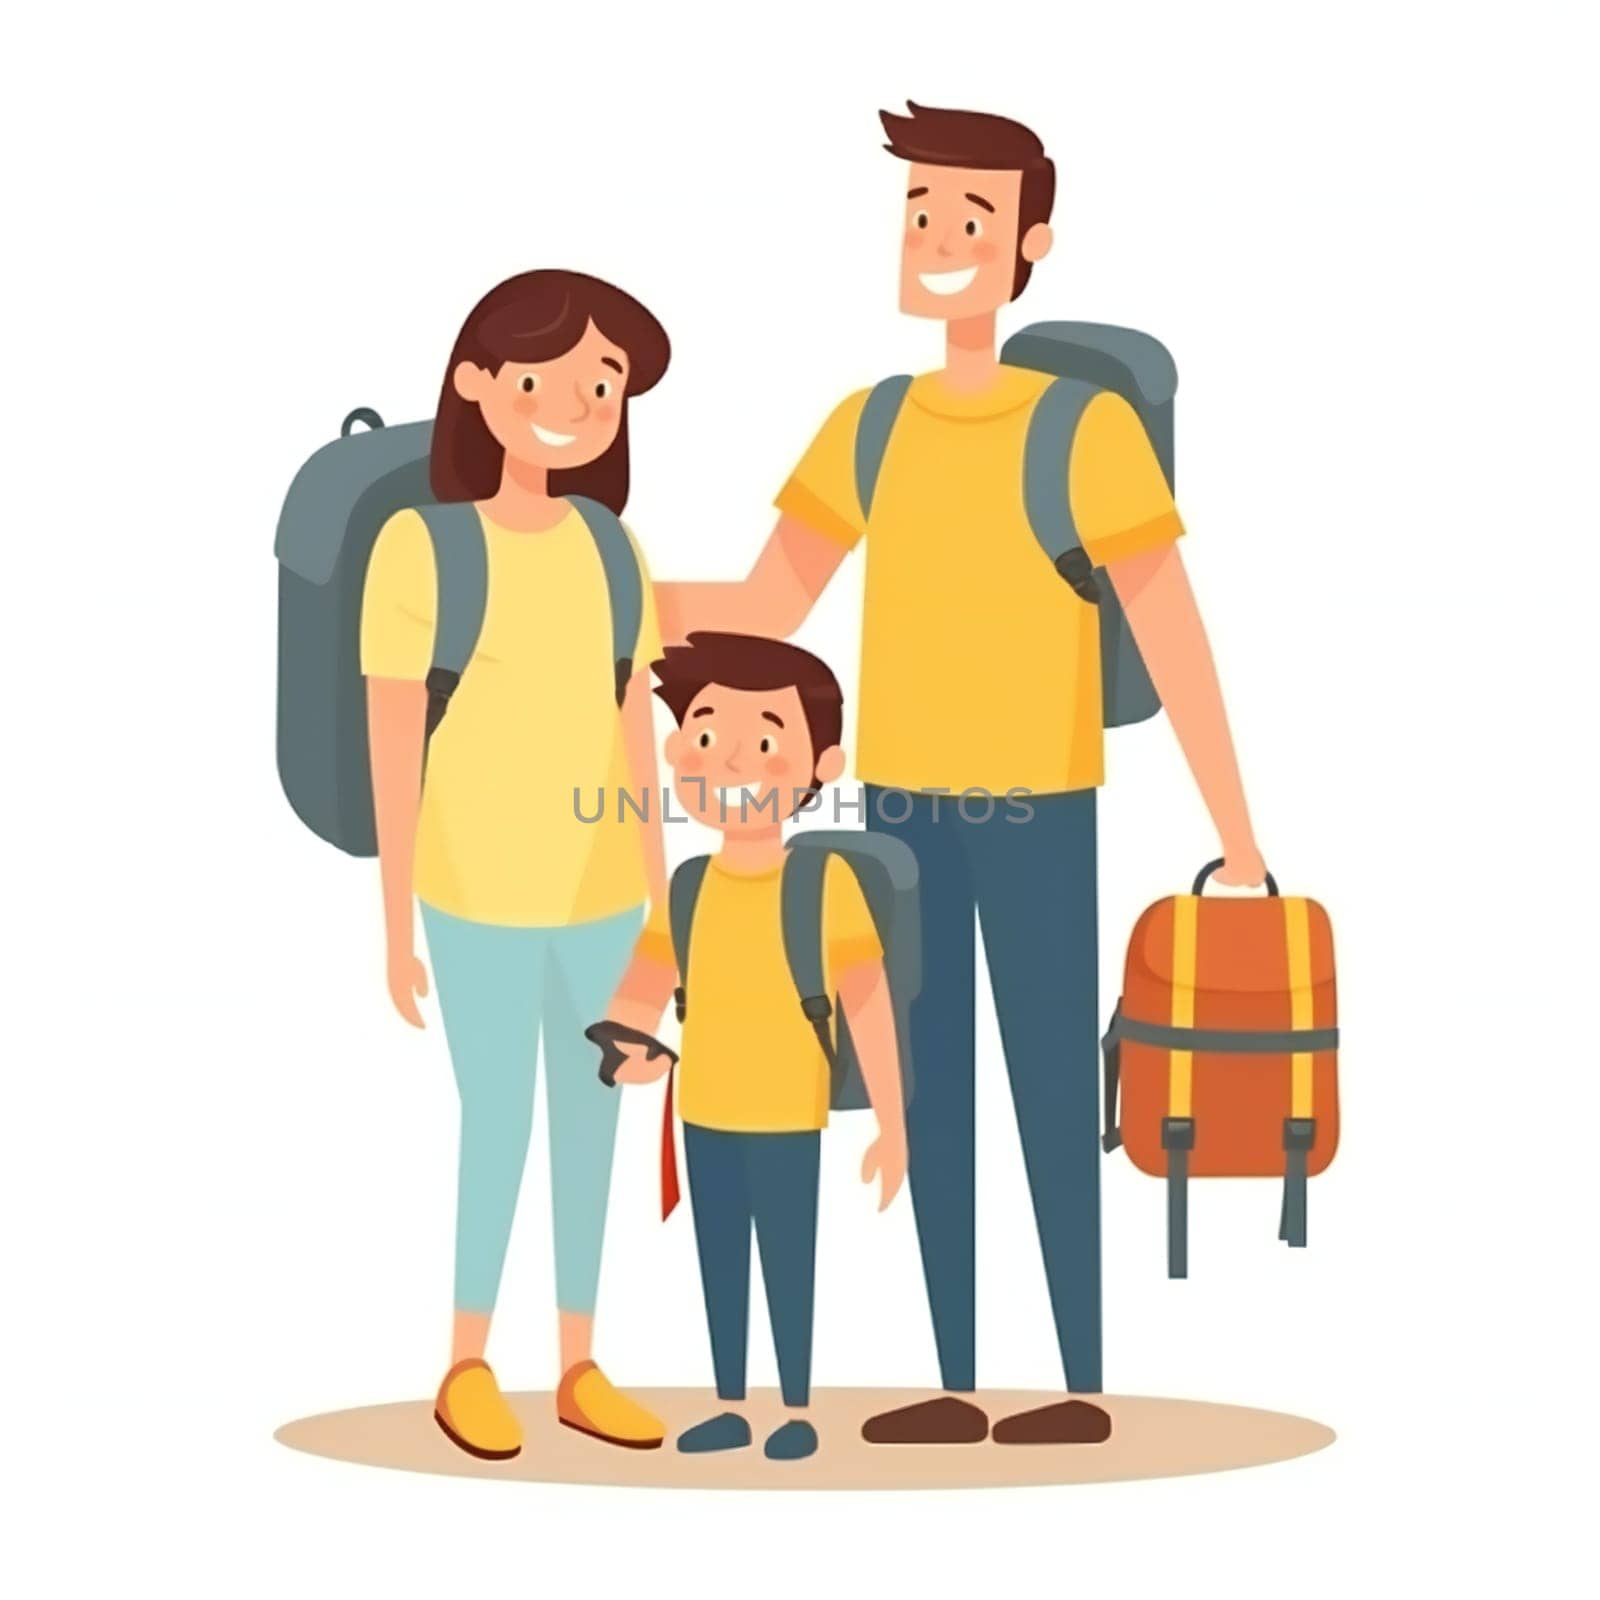 Happy Family travel together. Parents with children at the airport. Smiling man with luggage